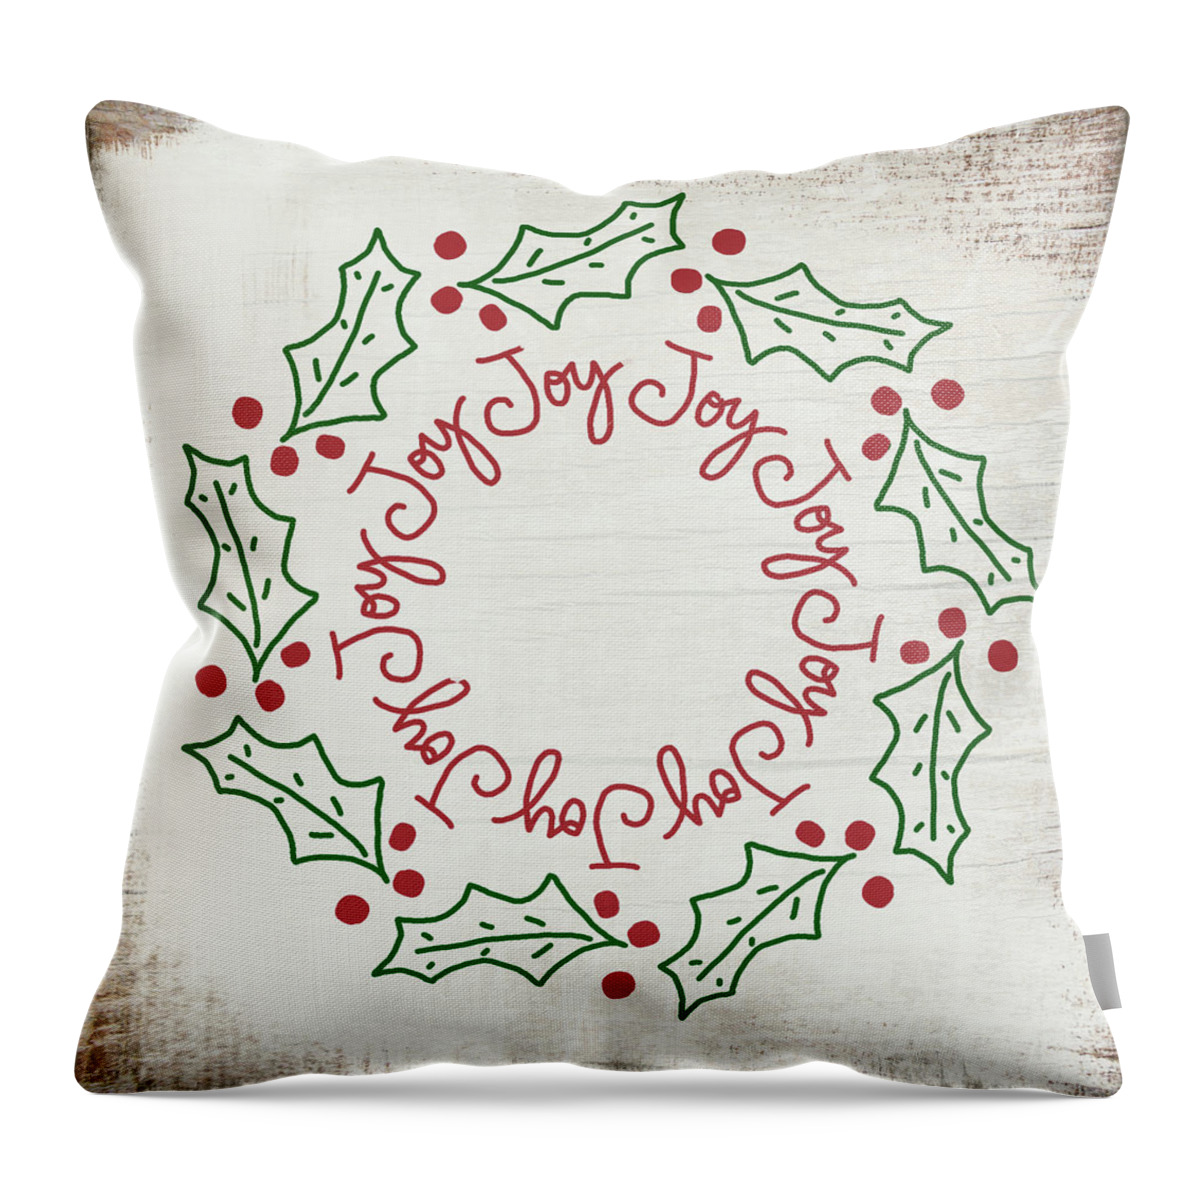 Joy Throw Pillow featuring the mixed media Joy Holly Wreath- Art by Linda Woods by Linda Woods